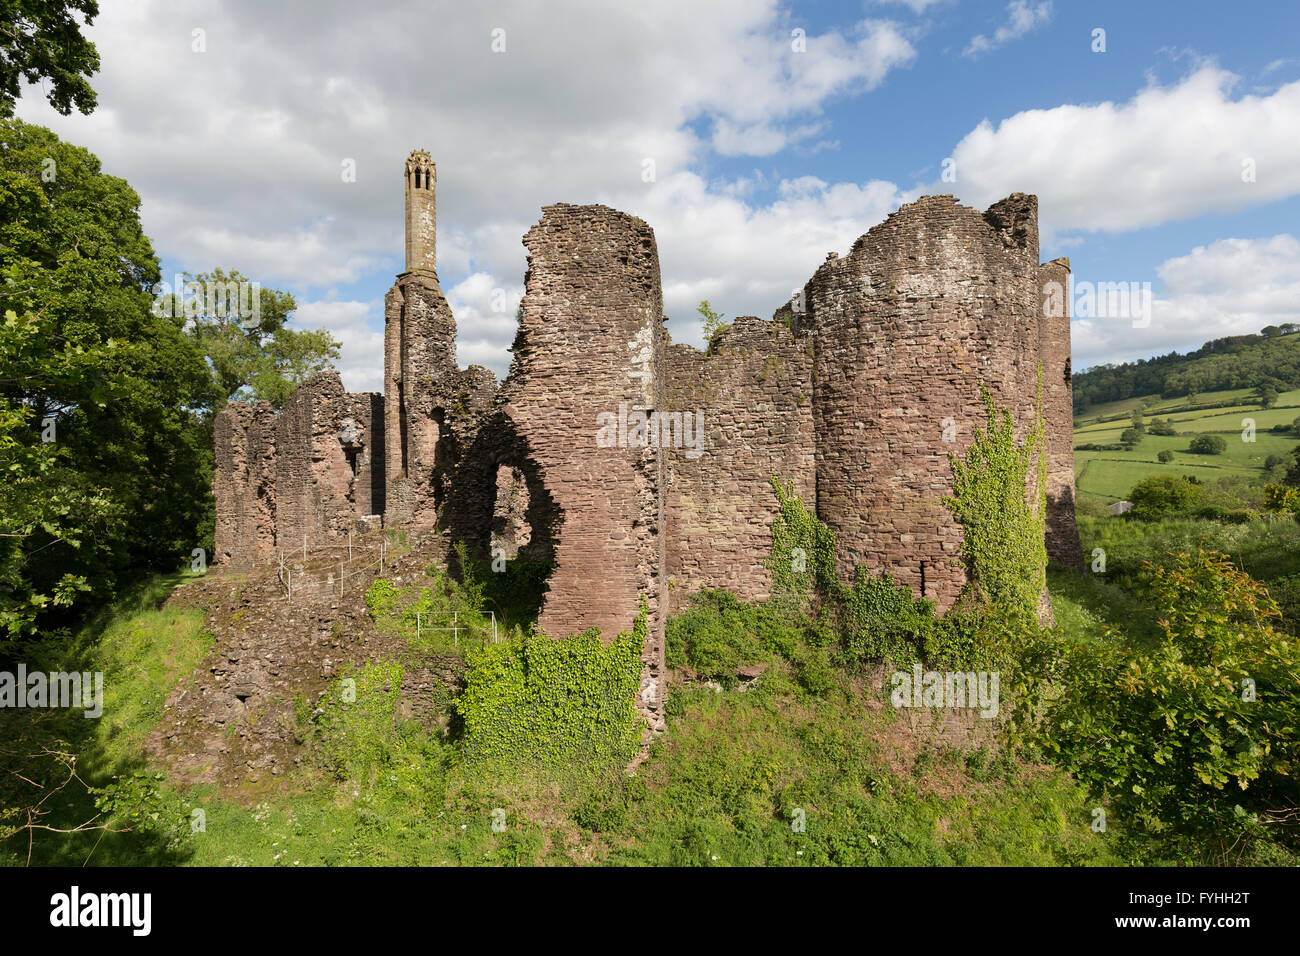 Grosmont castle ruin, Monmouthshire, Wales, UK Stock Photo